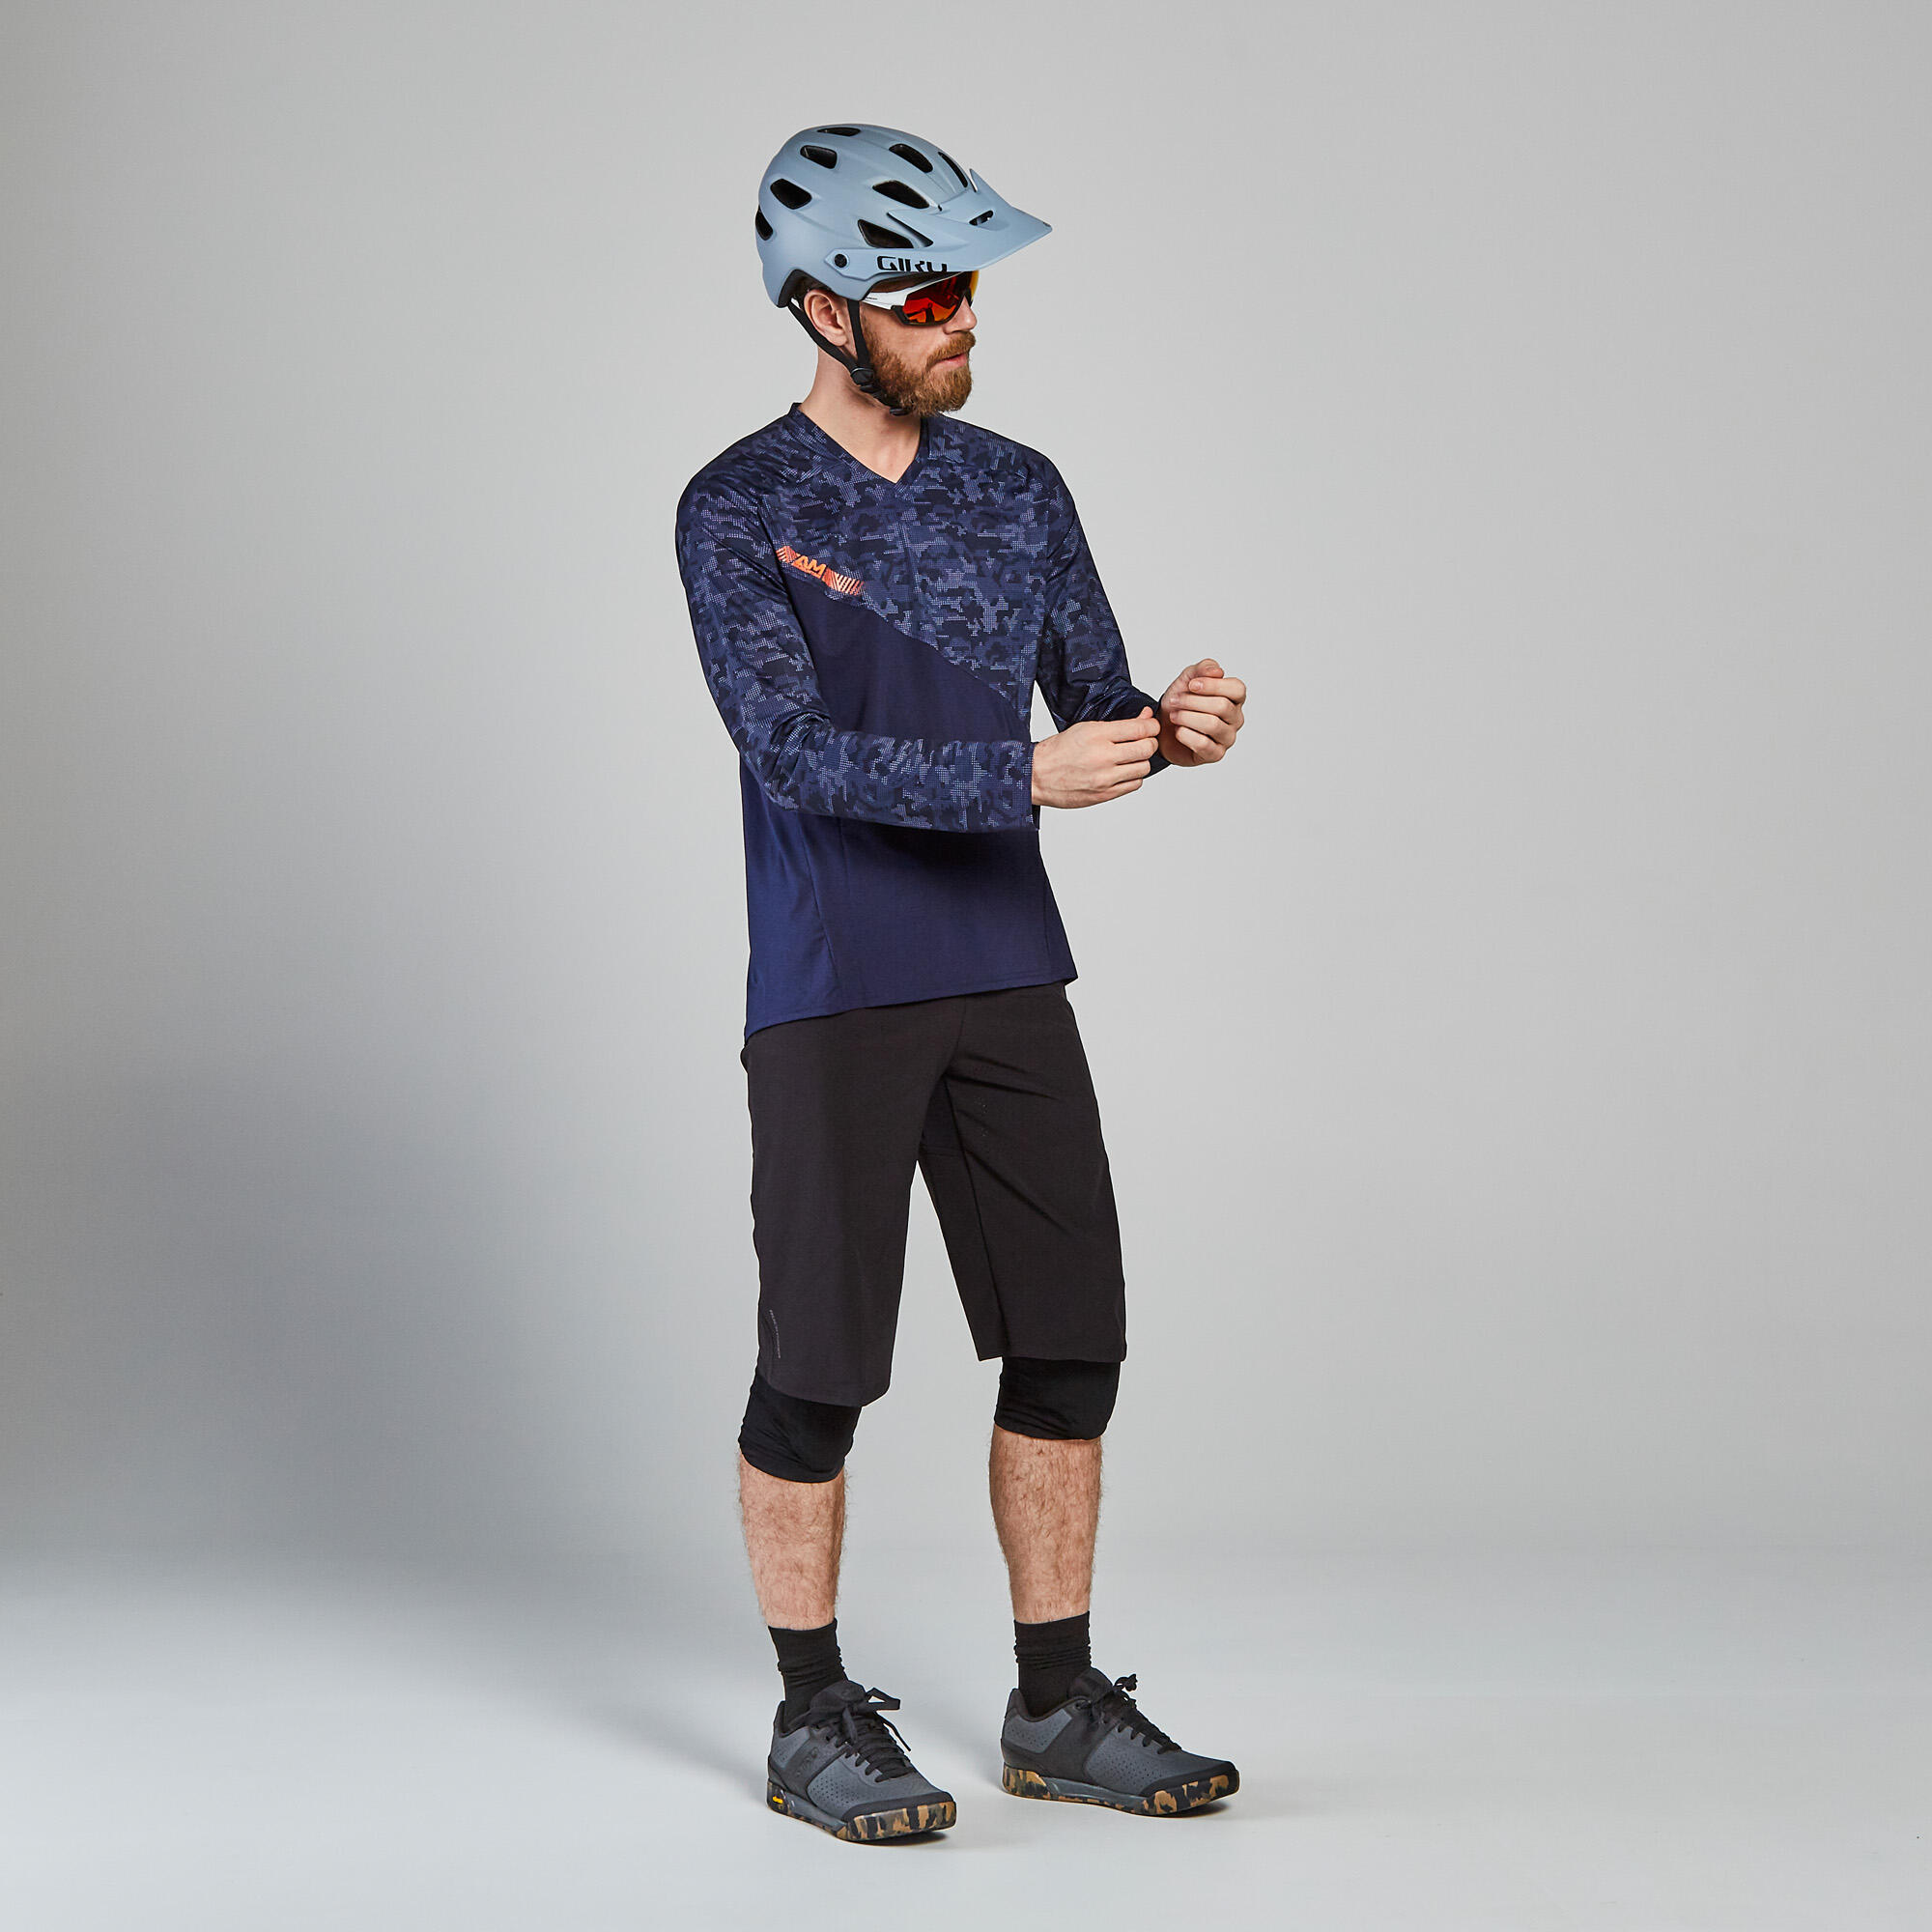 ROCKRIDER All-Mountain Long-Sleeved Jersey - Blue